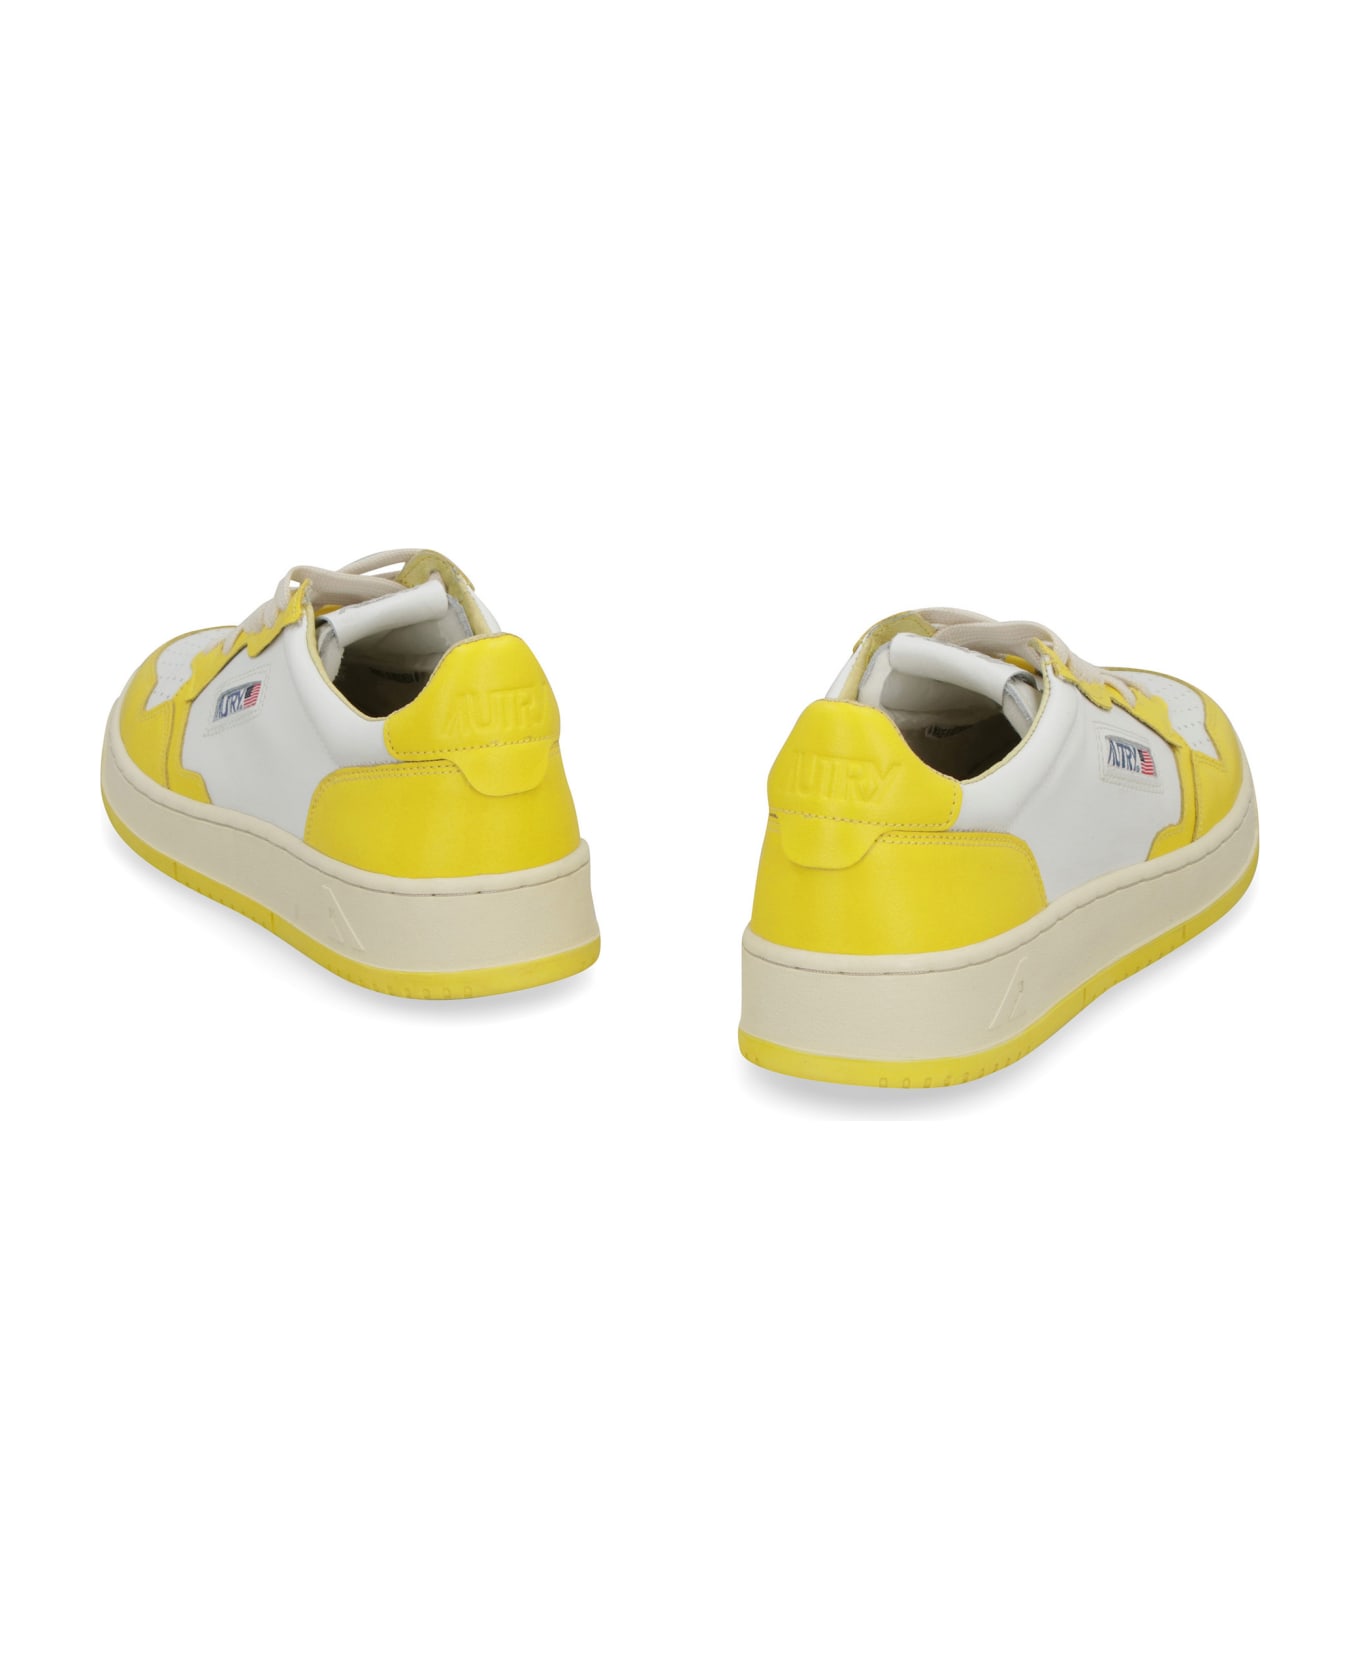 Autry 01 Low Man Goat Sneakers - Yellow